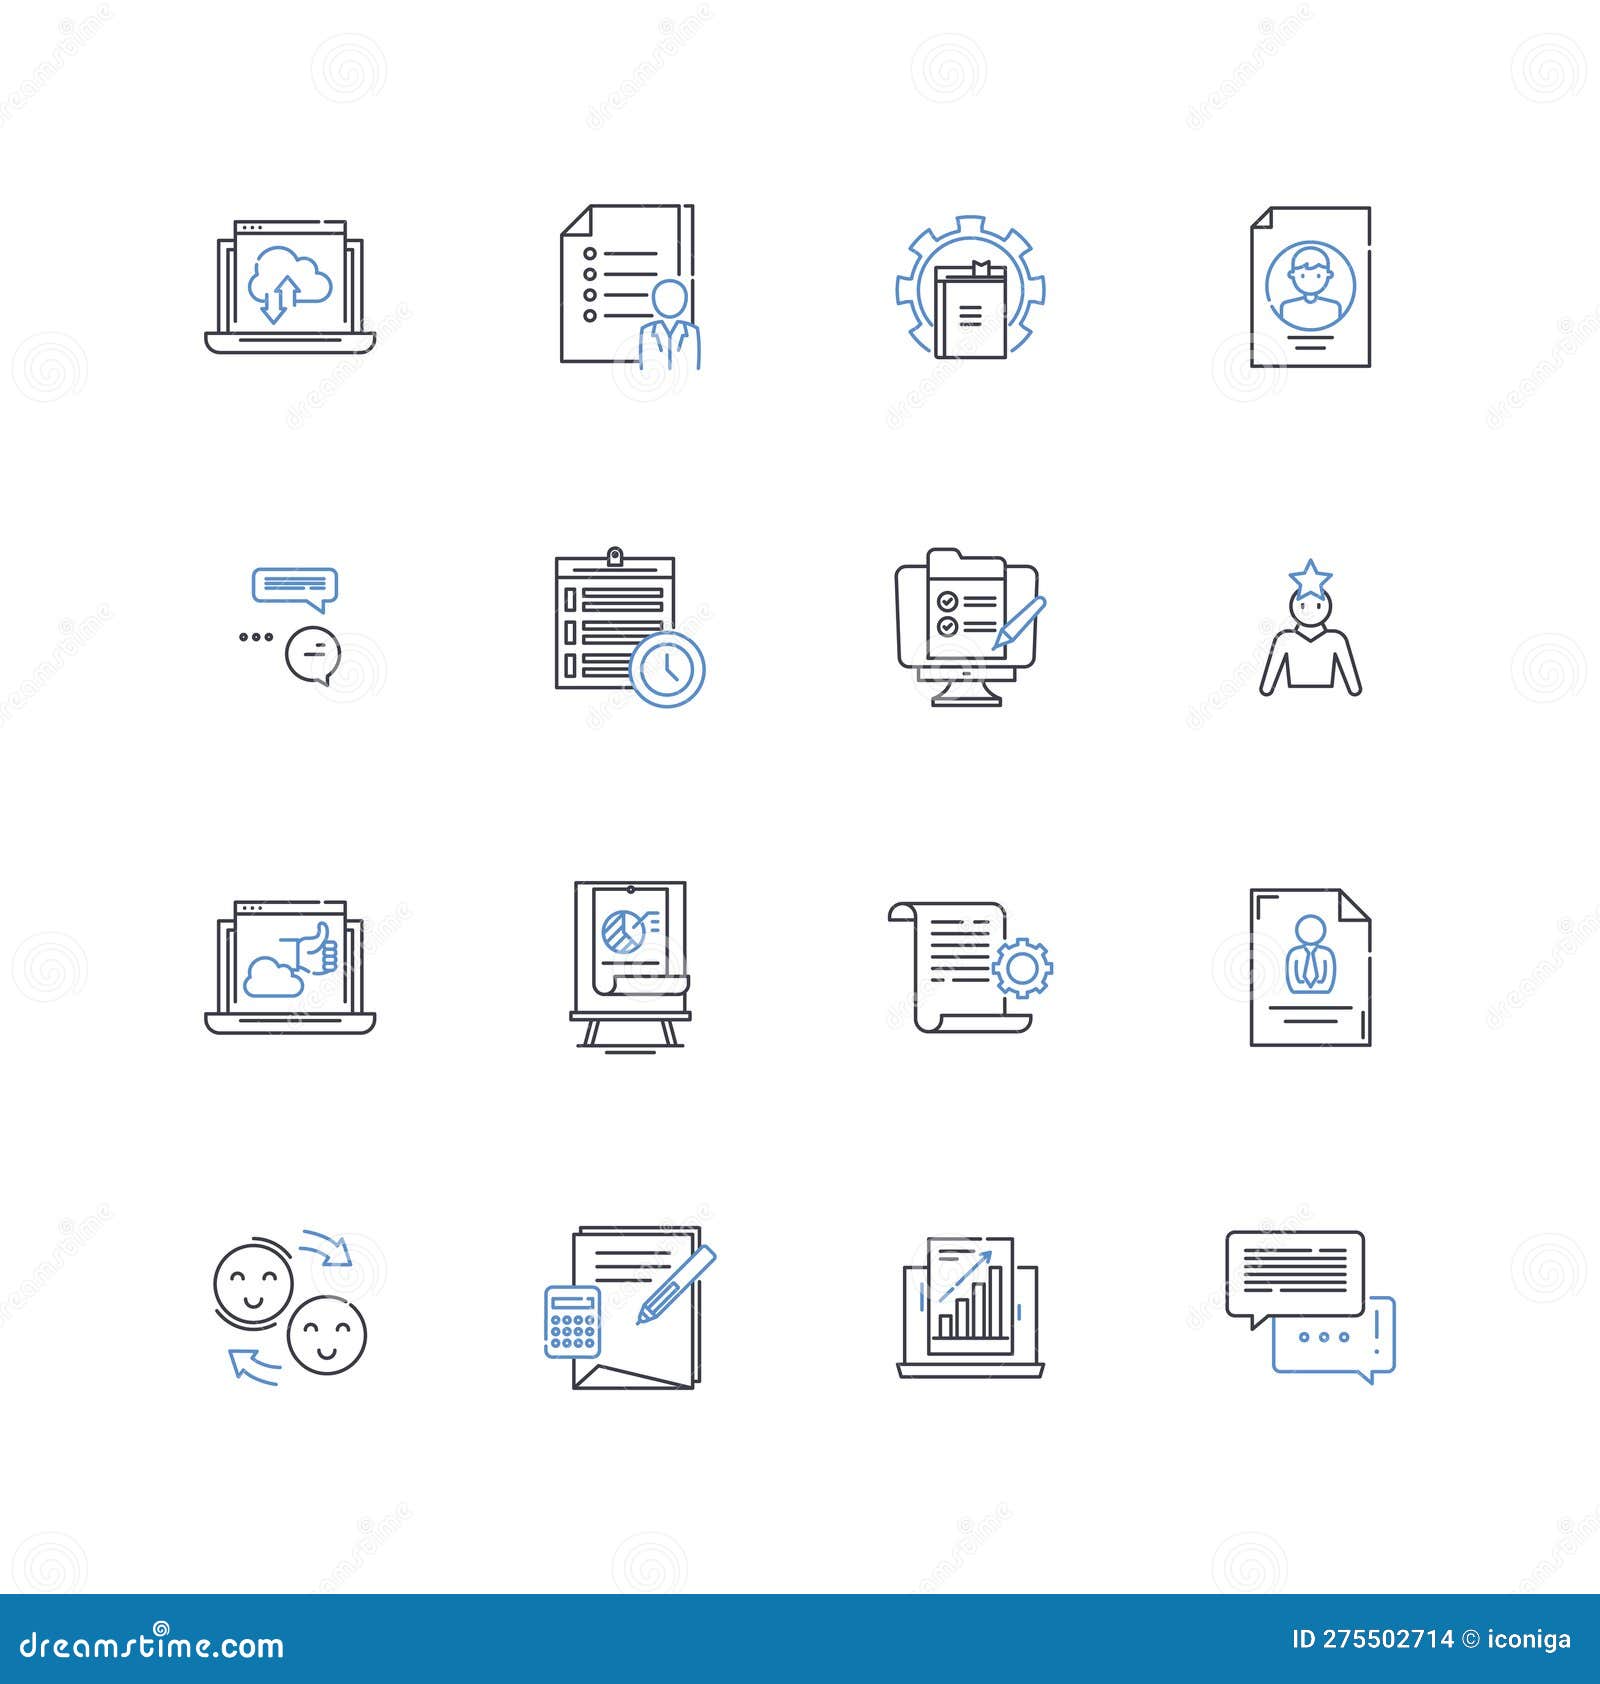 personal journal line icons collection. reflection, diary, memoir, recollection, memory, emotions, thoughts  and